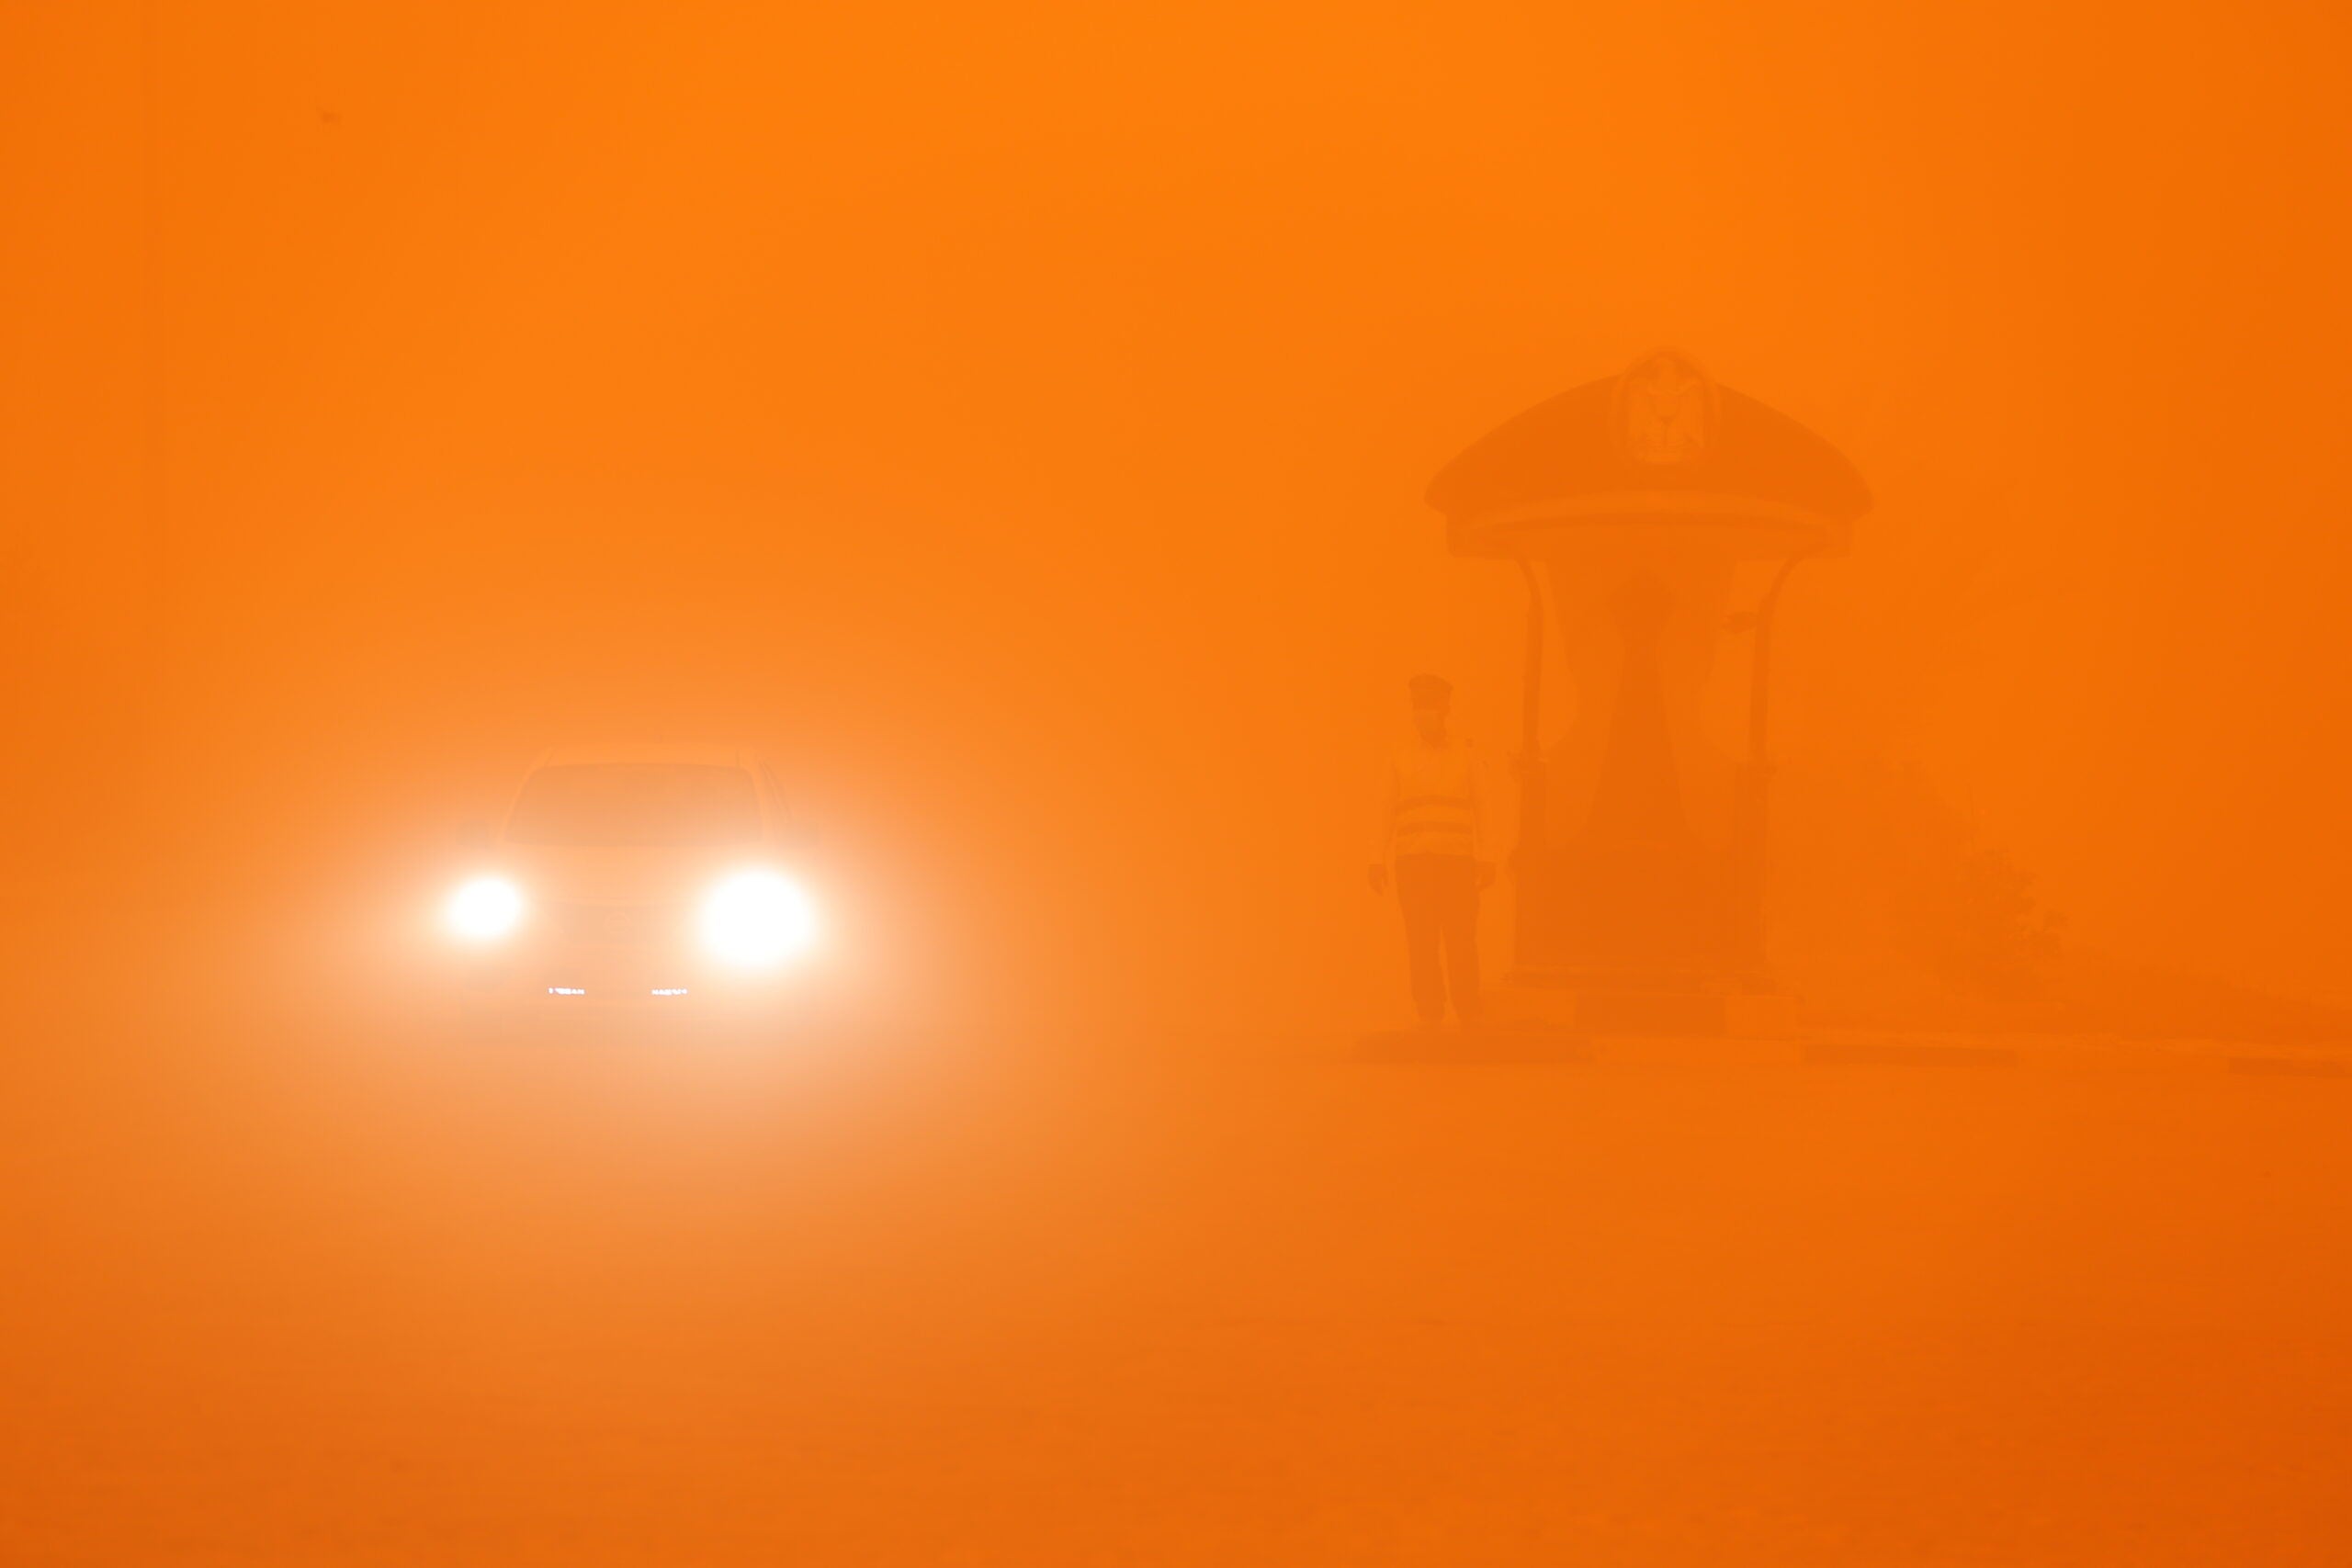 Will sandstorms force the Gulf to address climate change?